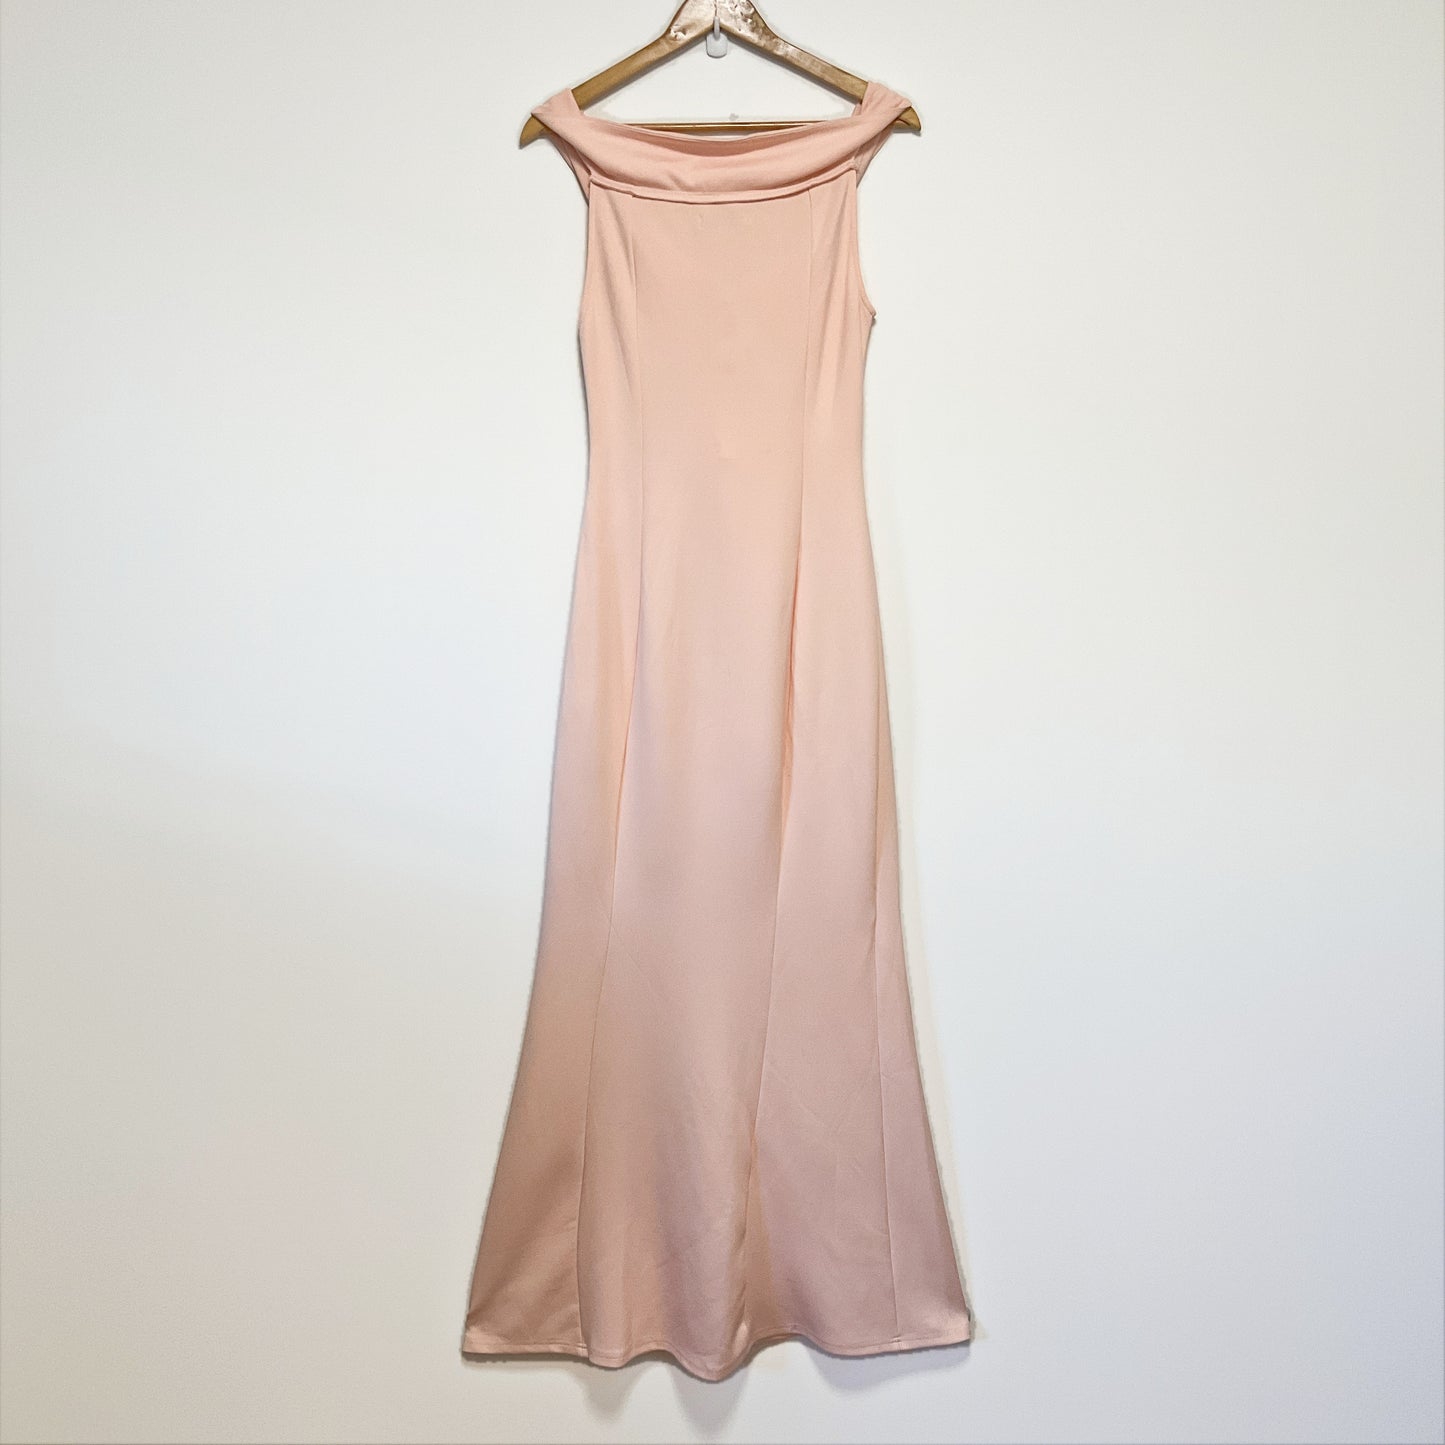 Showpo - Once For The Money Dress In Blush